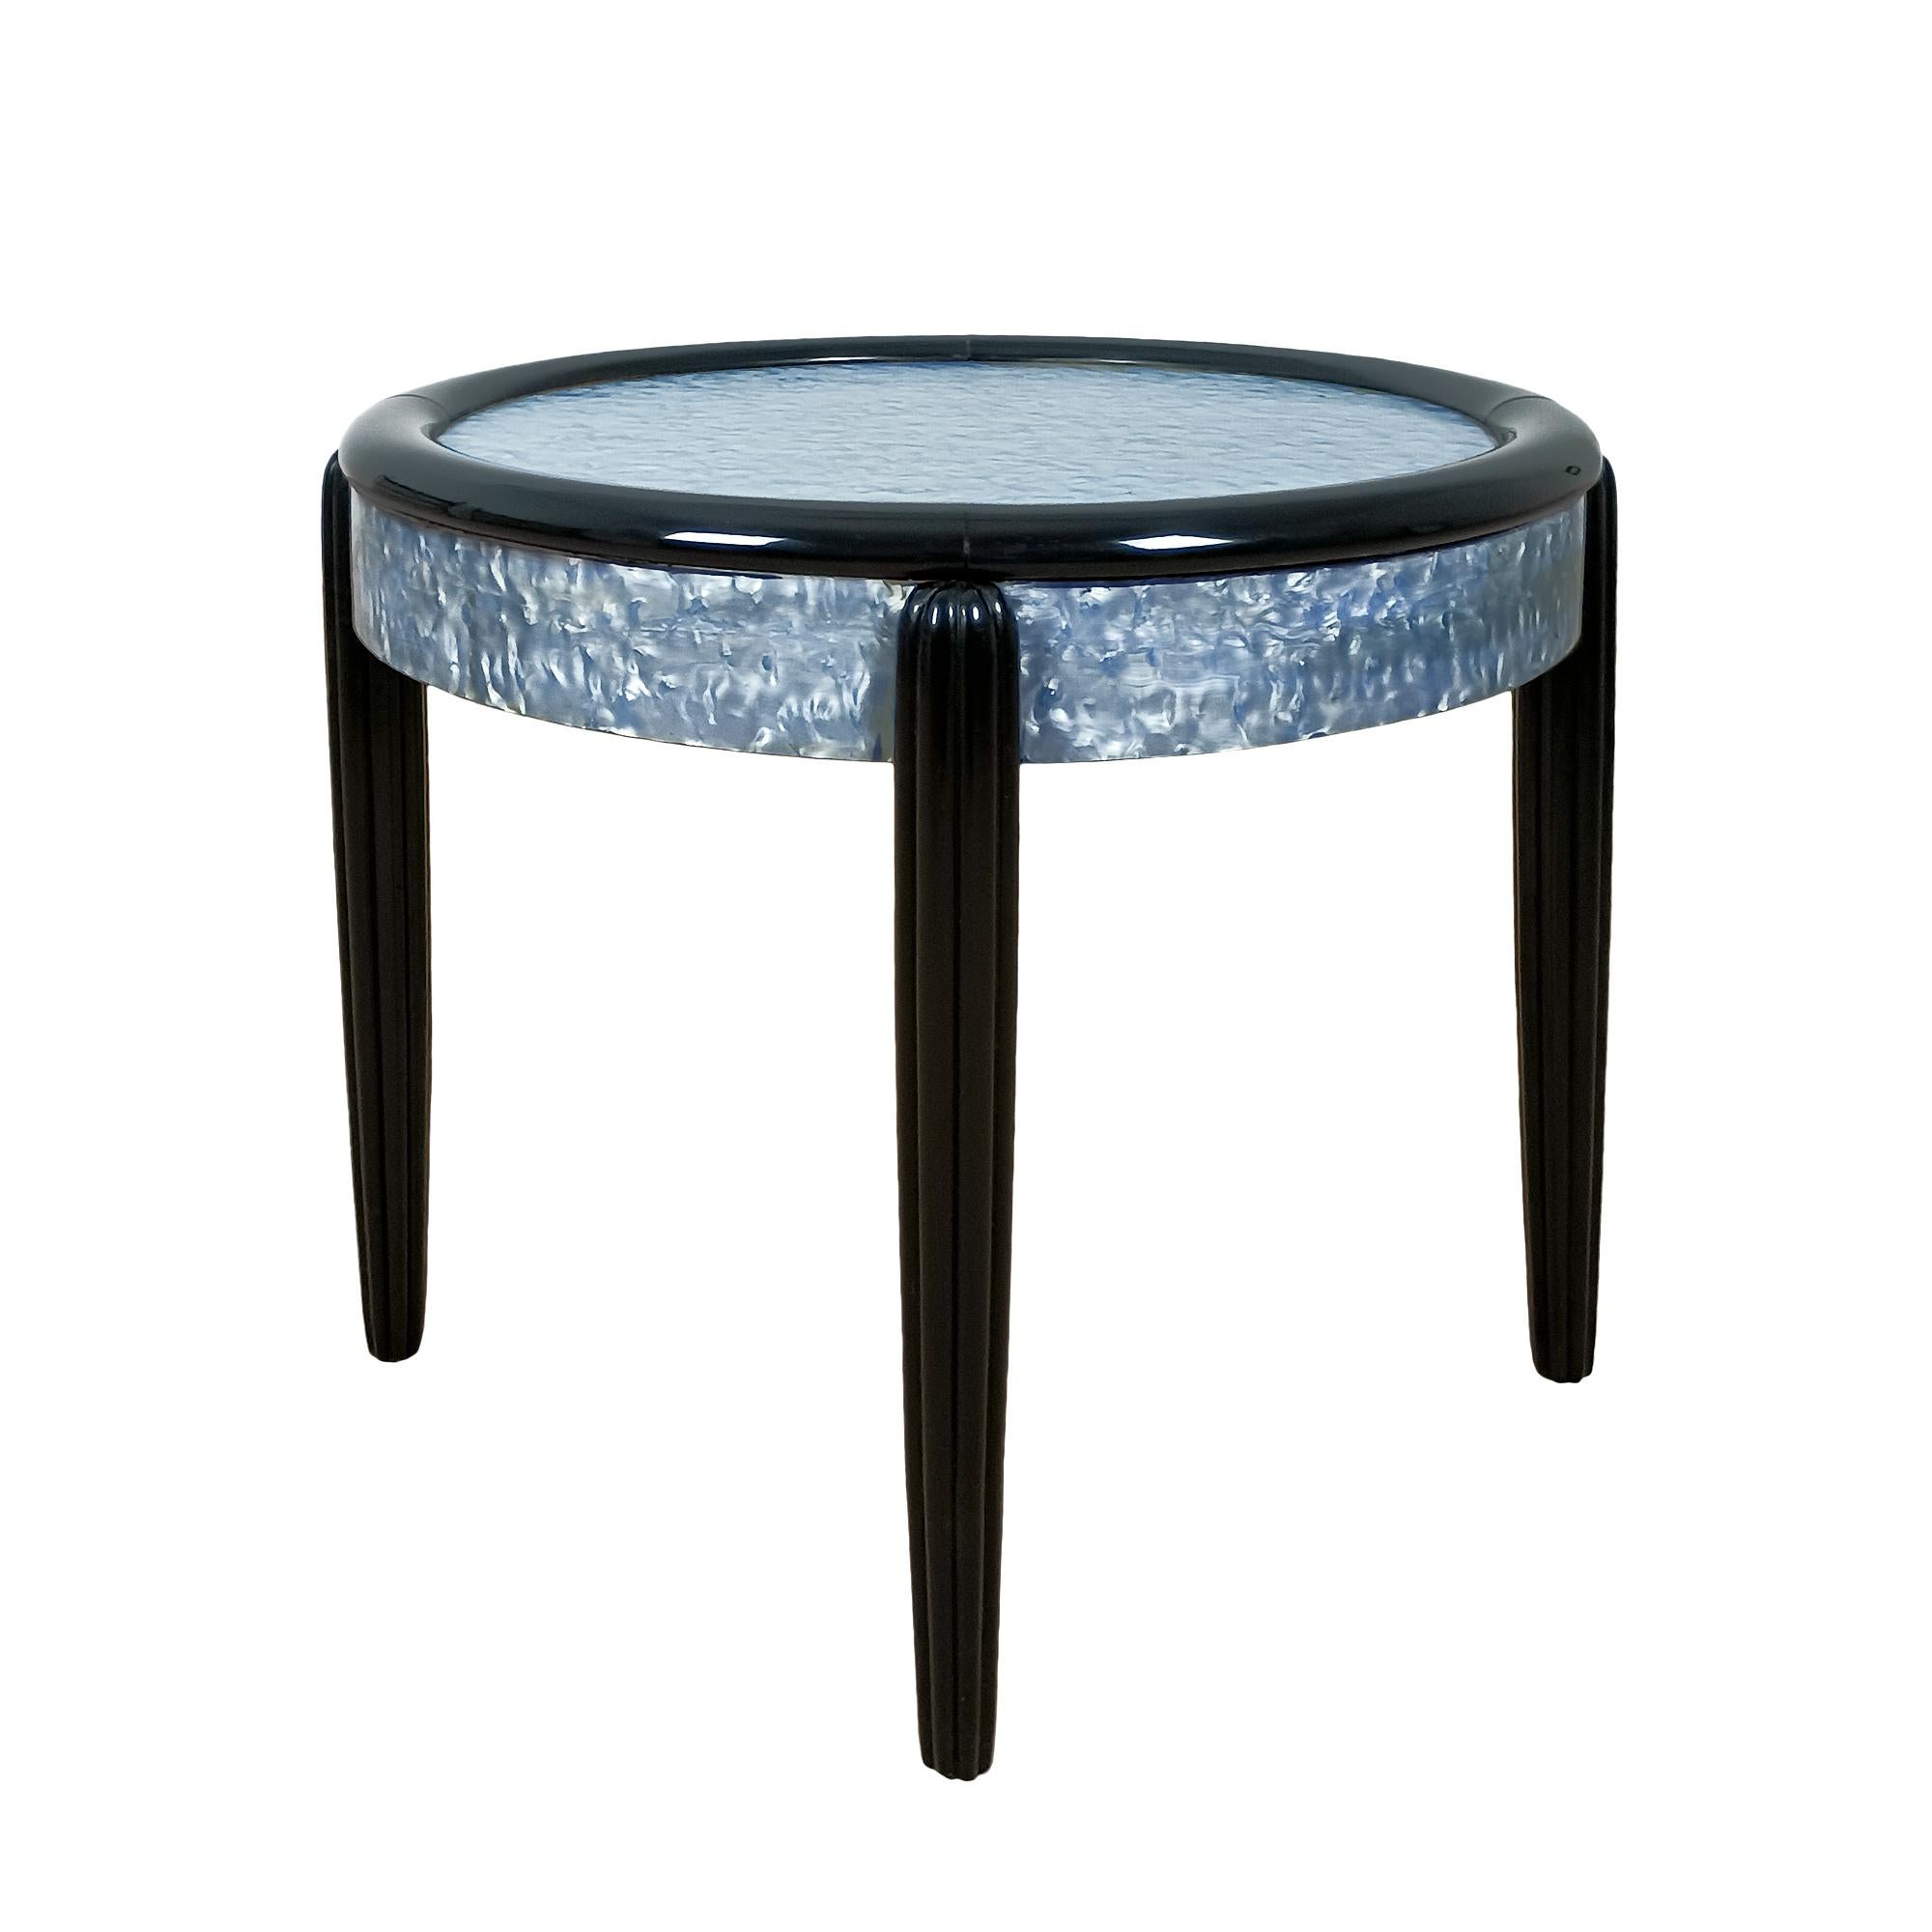 French Art Deco Side Table In Celluloid – France 1925 For Sale